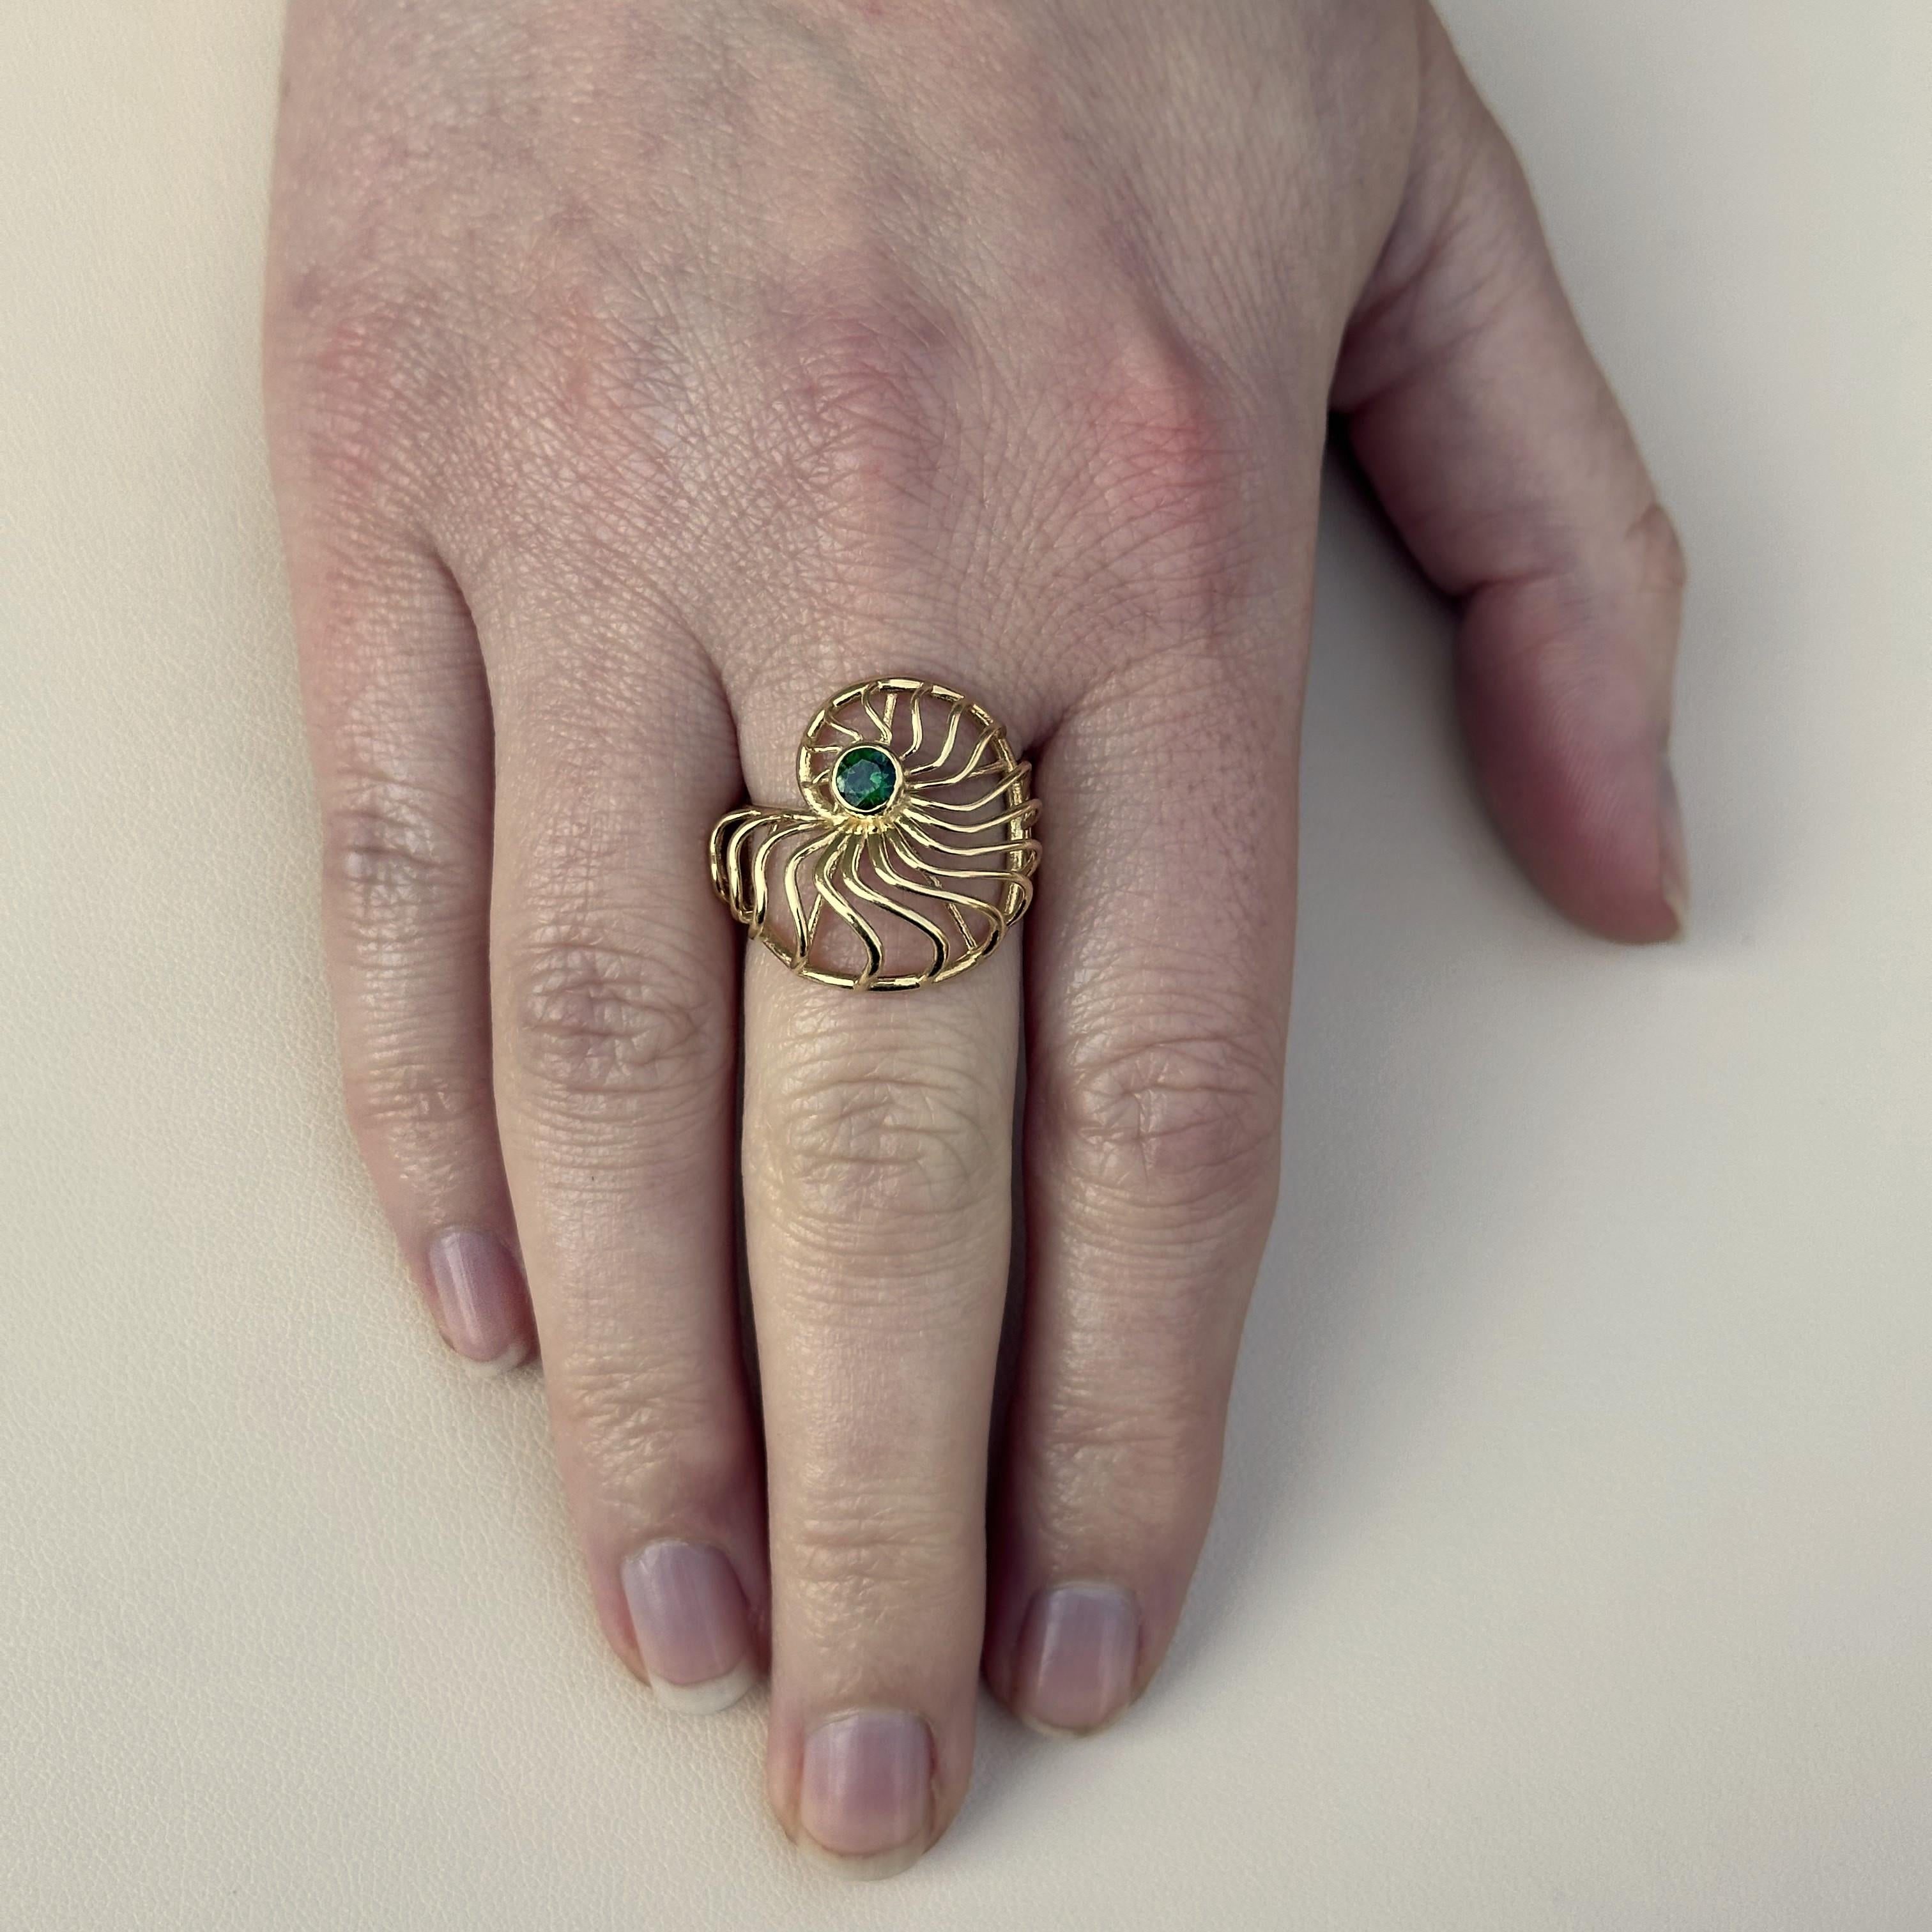 A size 6 1/2 18K yellow gold Ammonite style ring featuring a bezel set Tsavorite Garnet weighing .30 carats. This ring was designed and made by llyn strong.